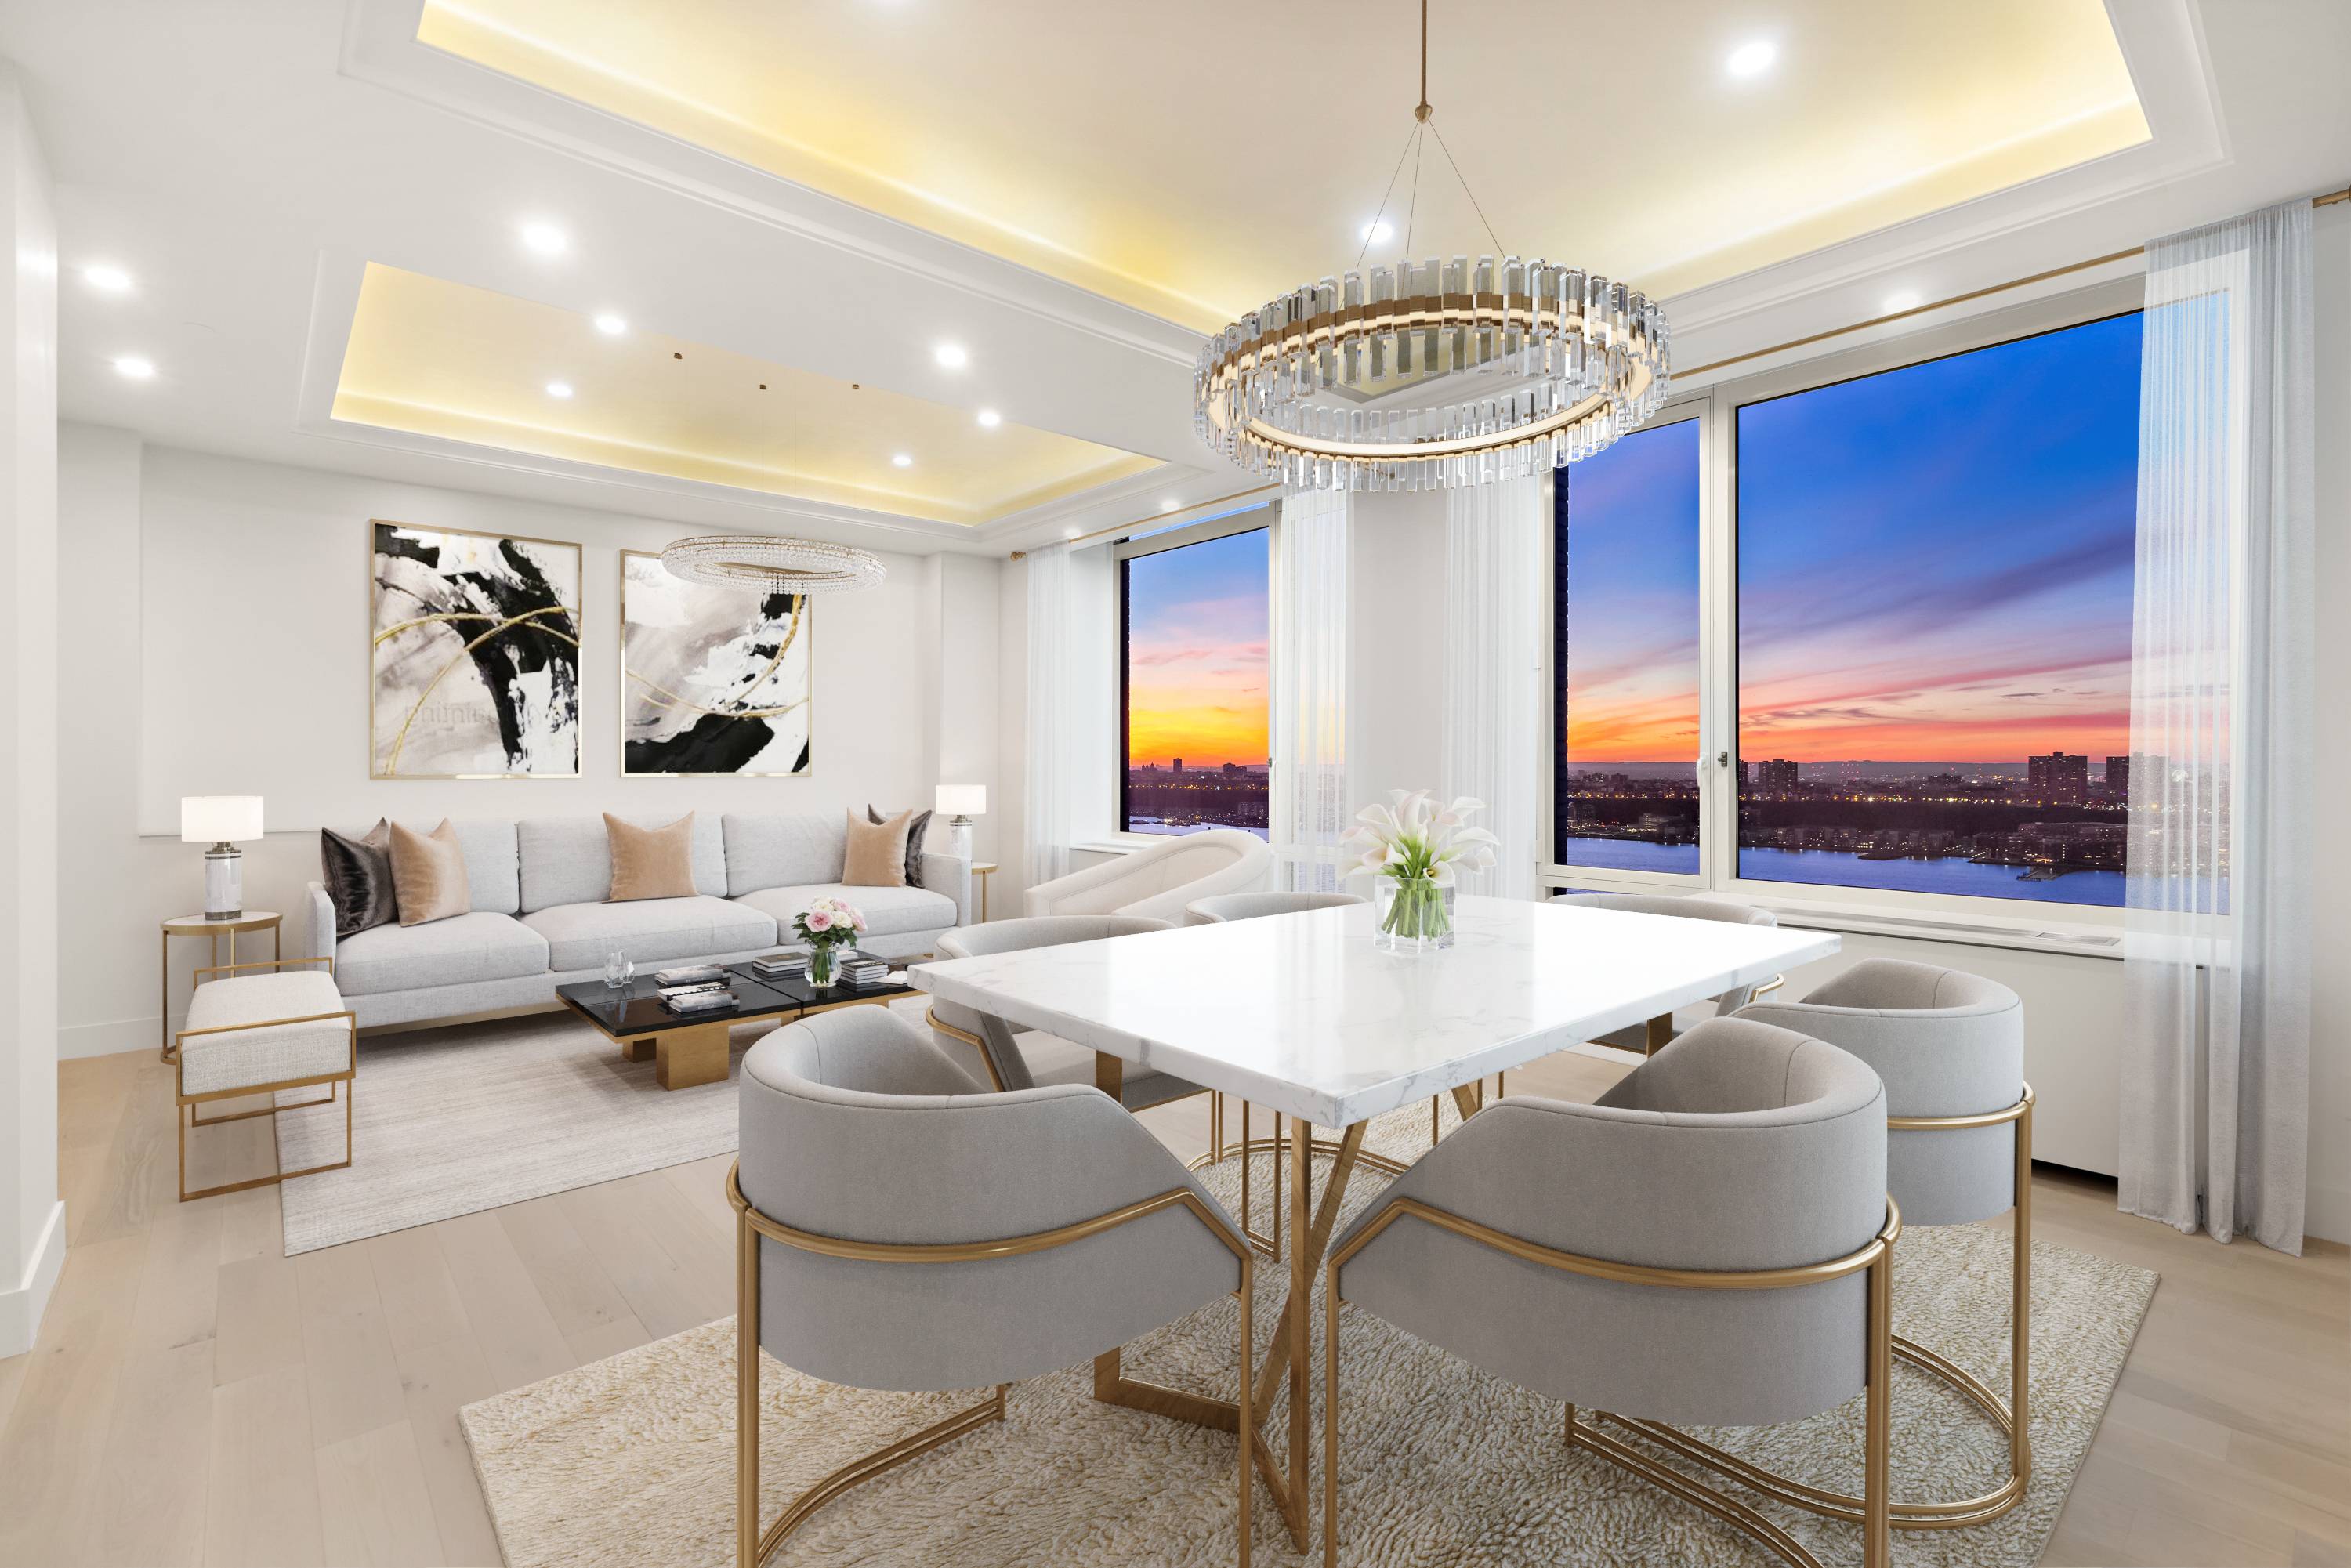 MANSION IN THE SKY |Breath Taking Penthouse Residence New York, NY